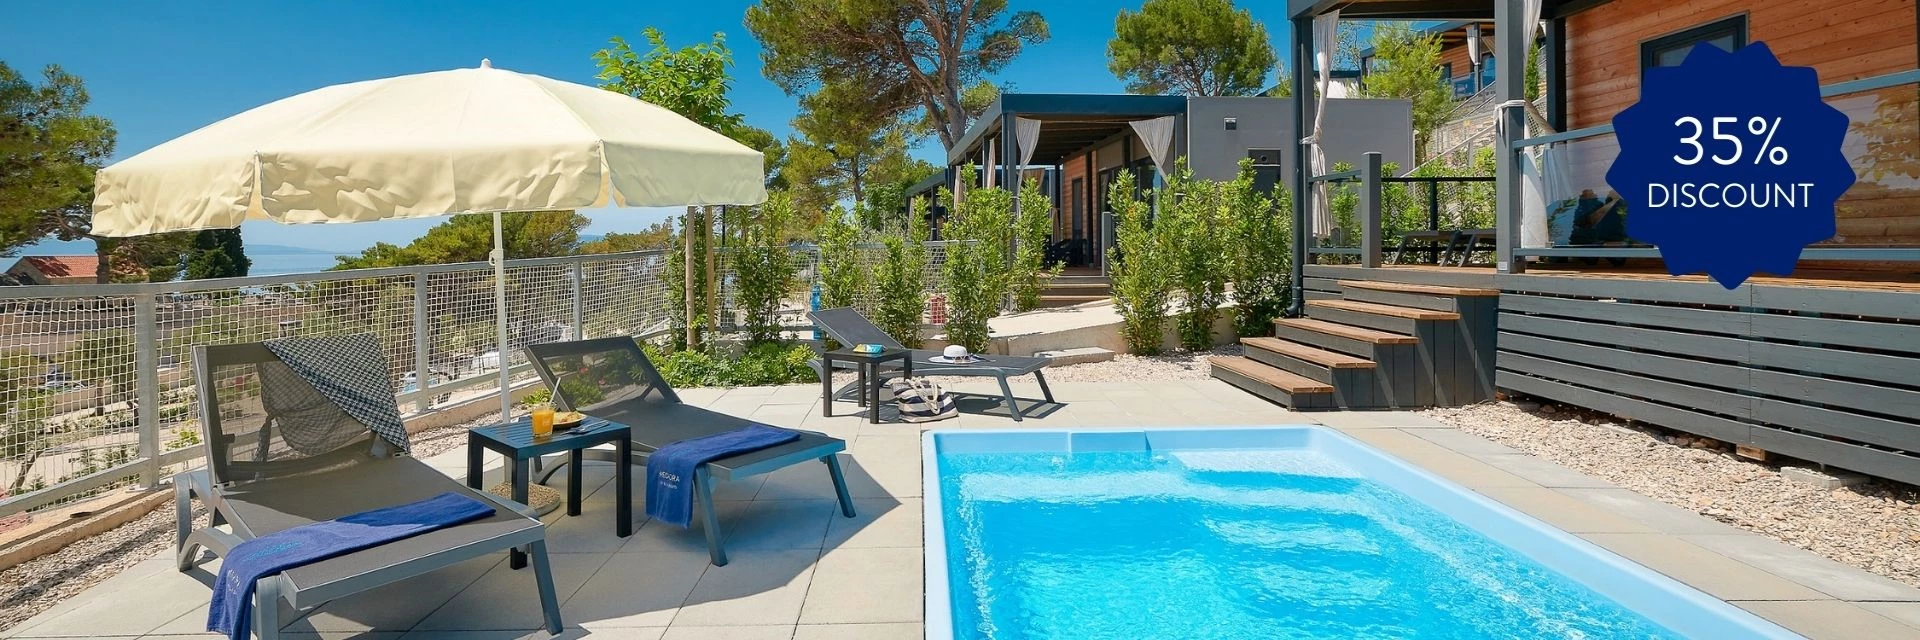 Relax by your private heated pool!